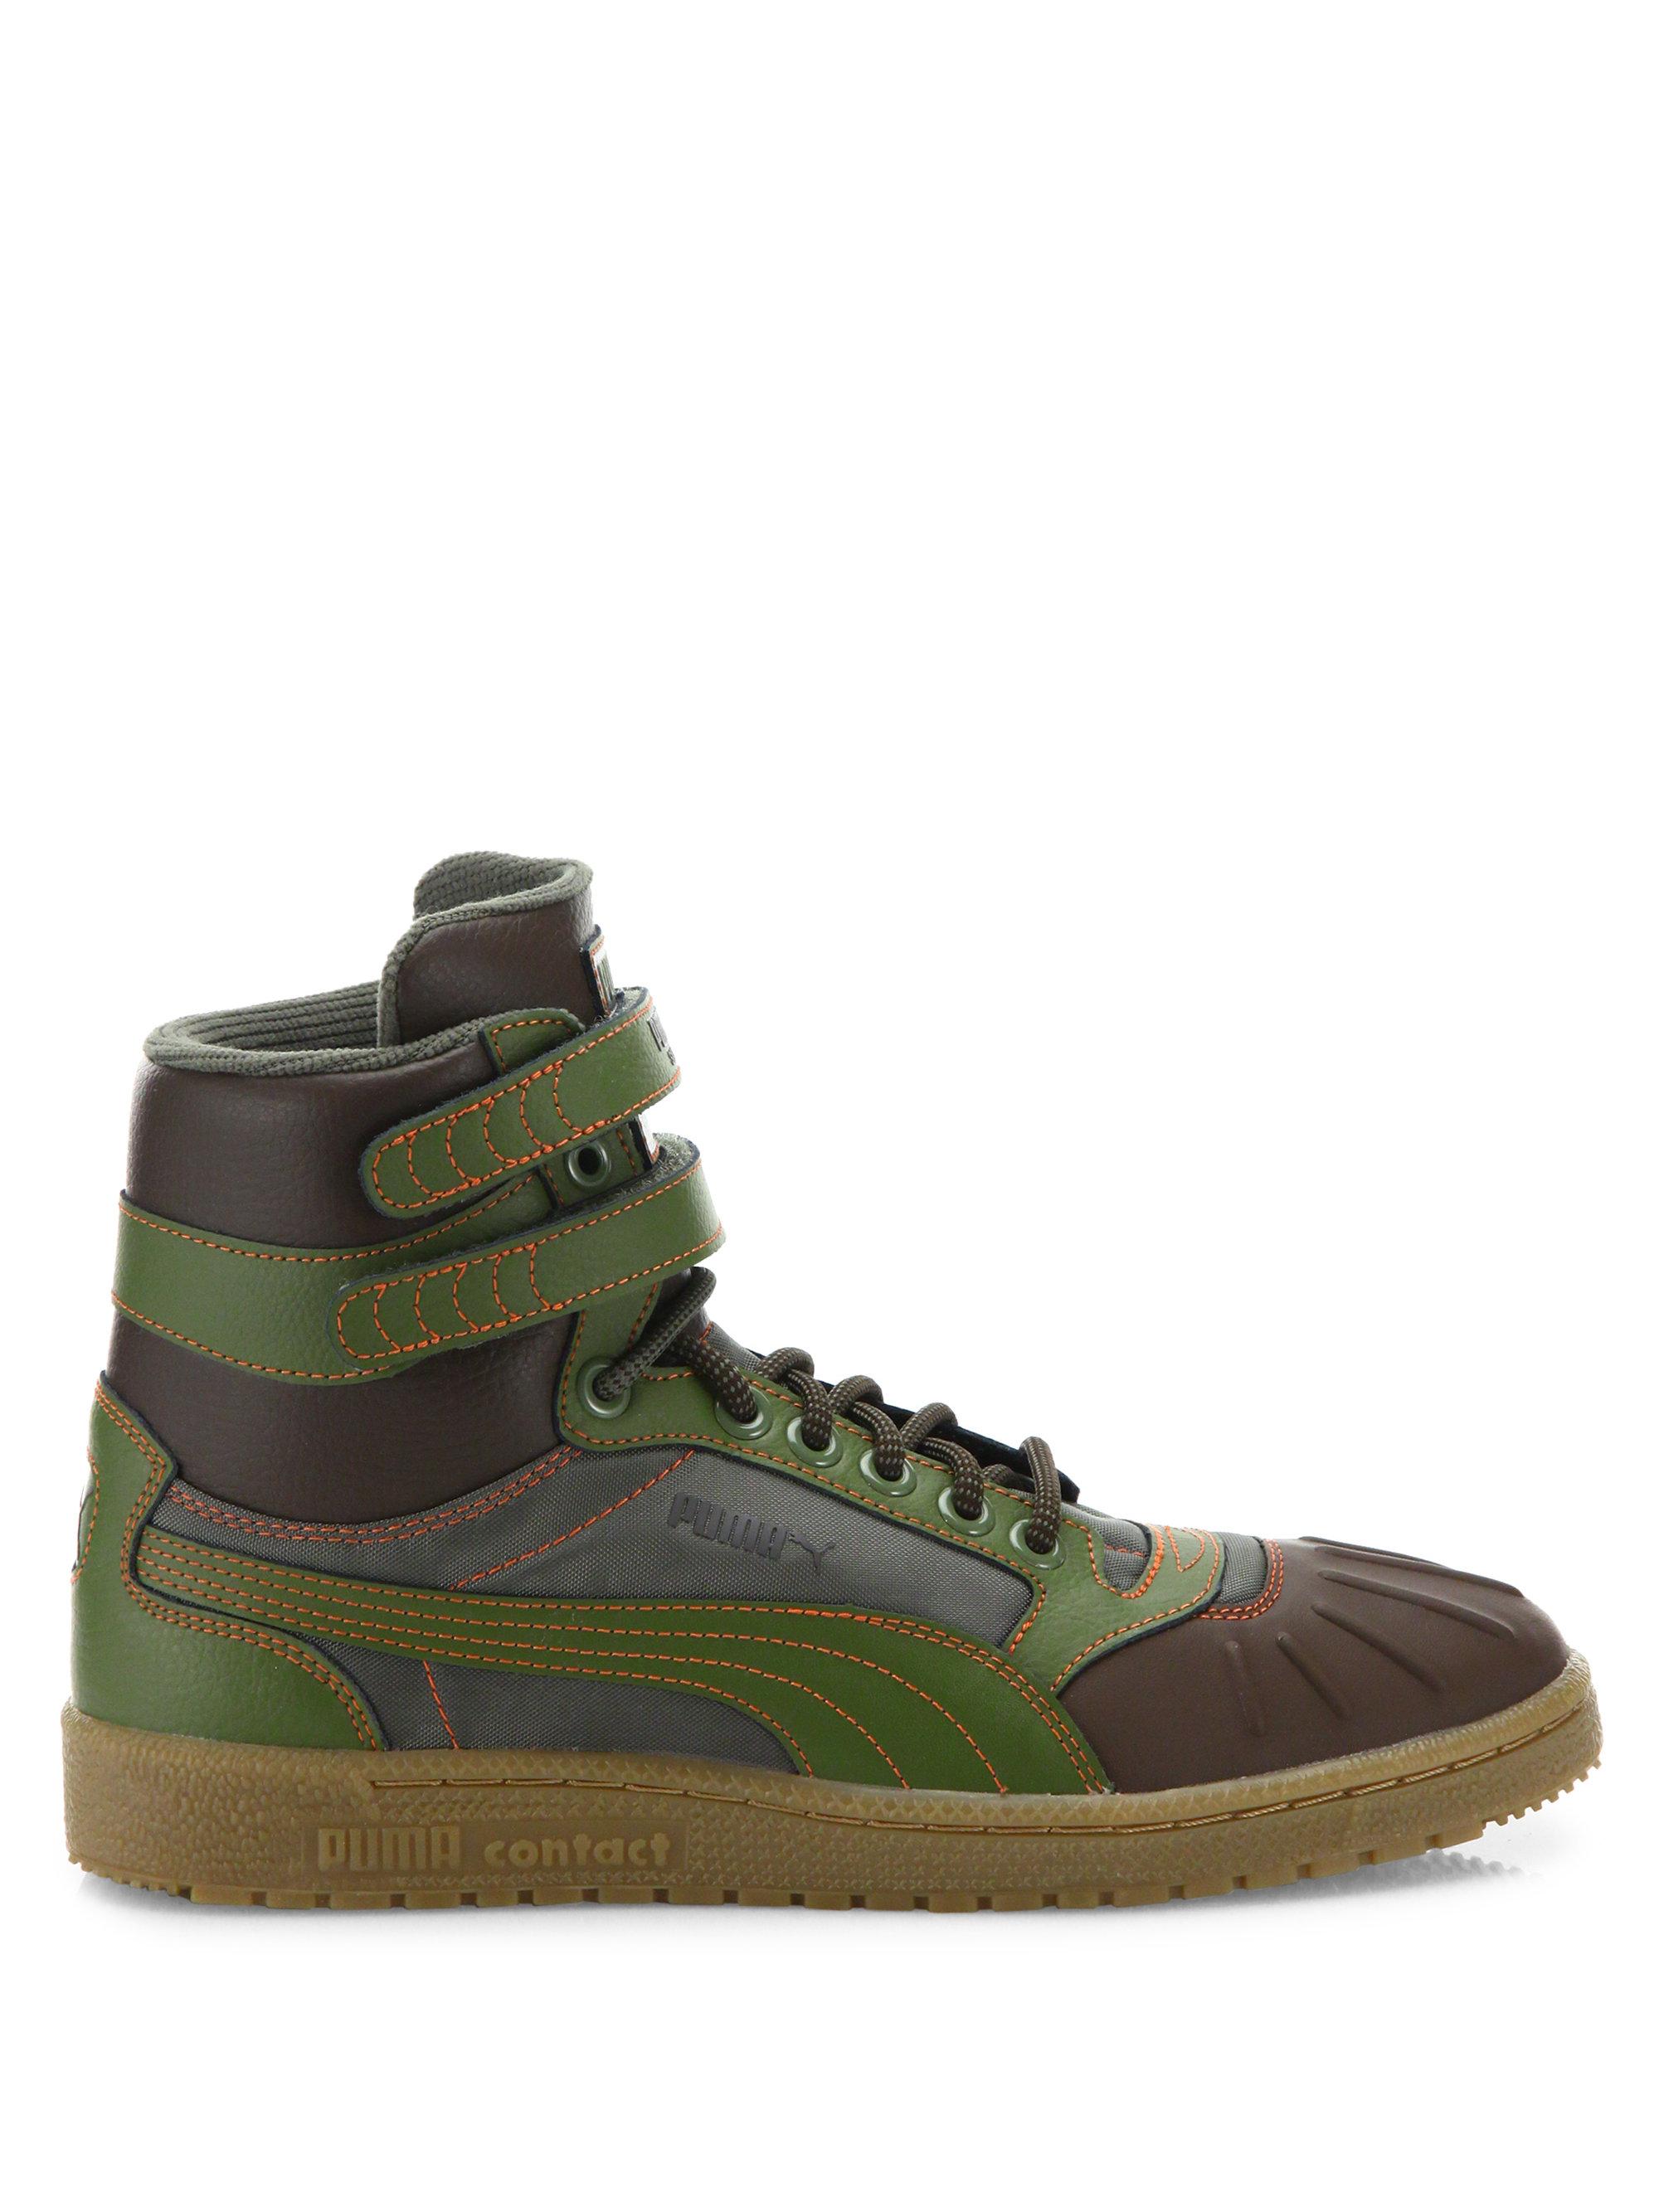 Lyst - Puma Sky Ii Hi Duck Leather Boots in Brown for Men